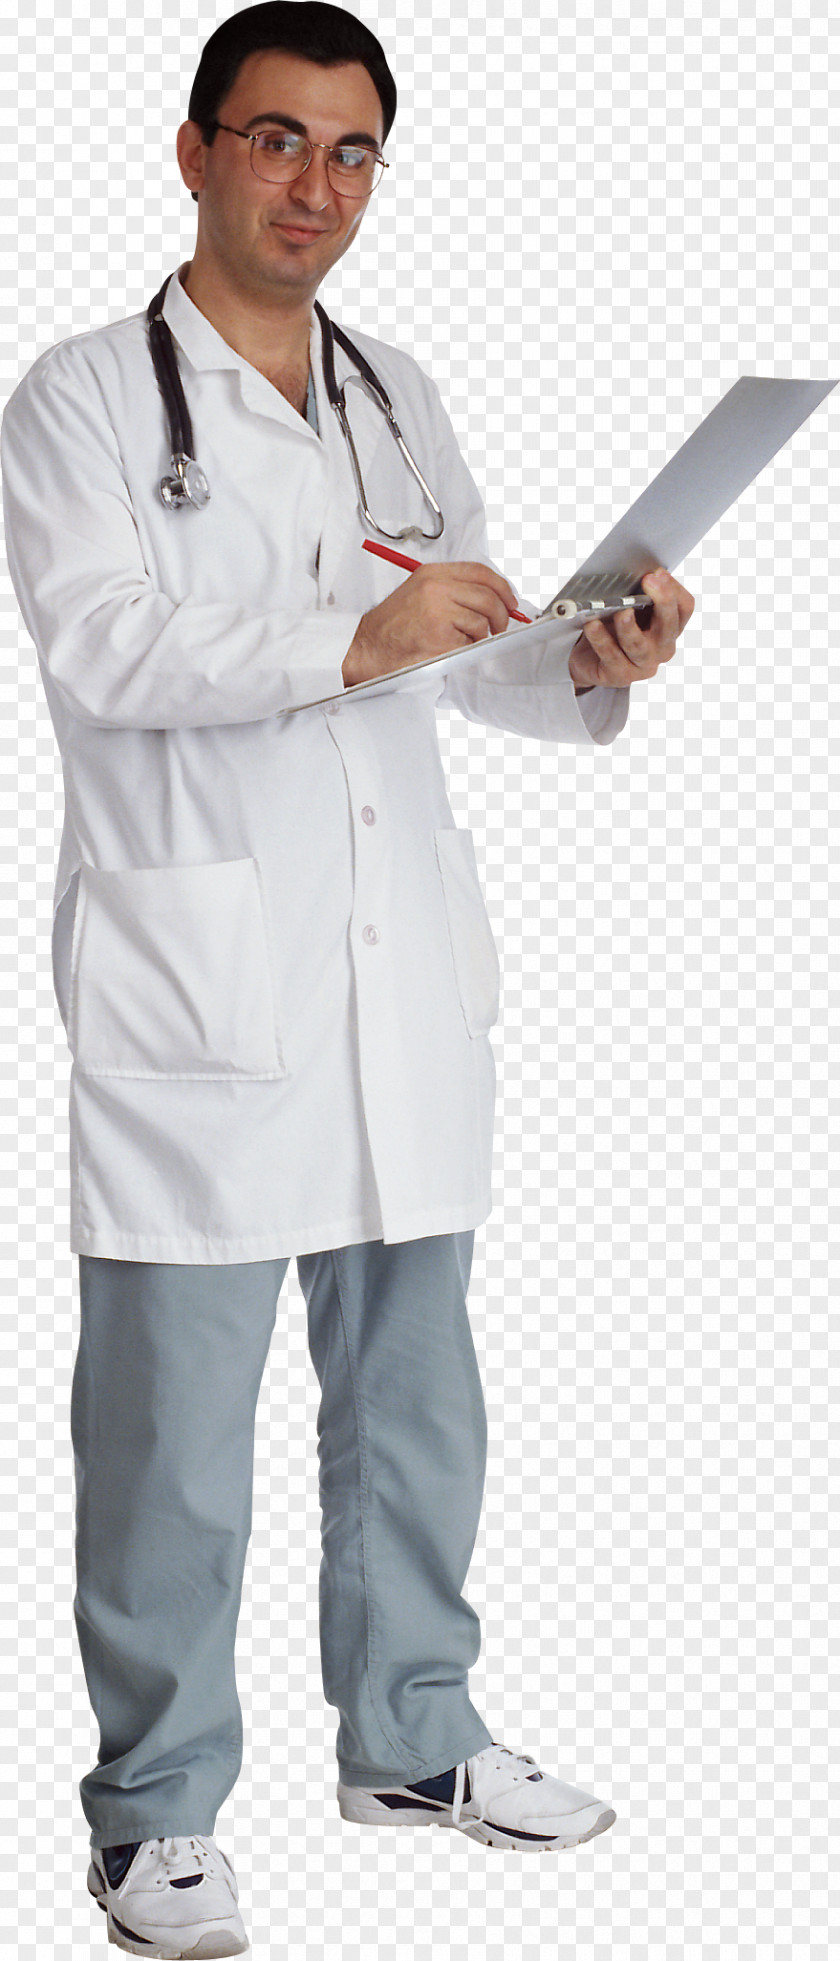 Doctor Physician Icon World Organization Of Family Doctors Computer File PNG